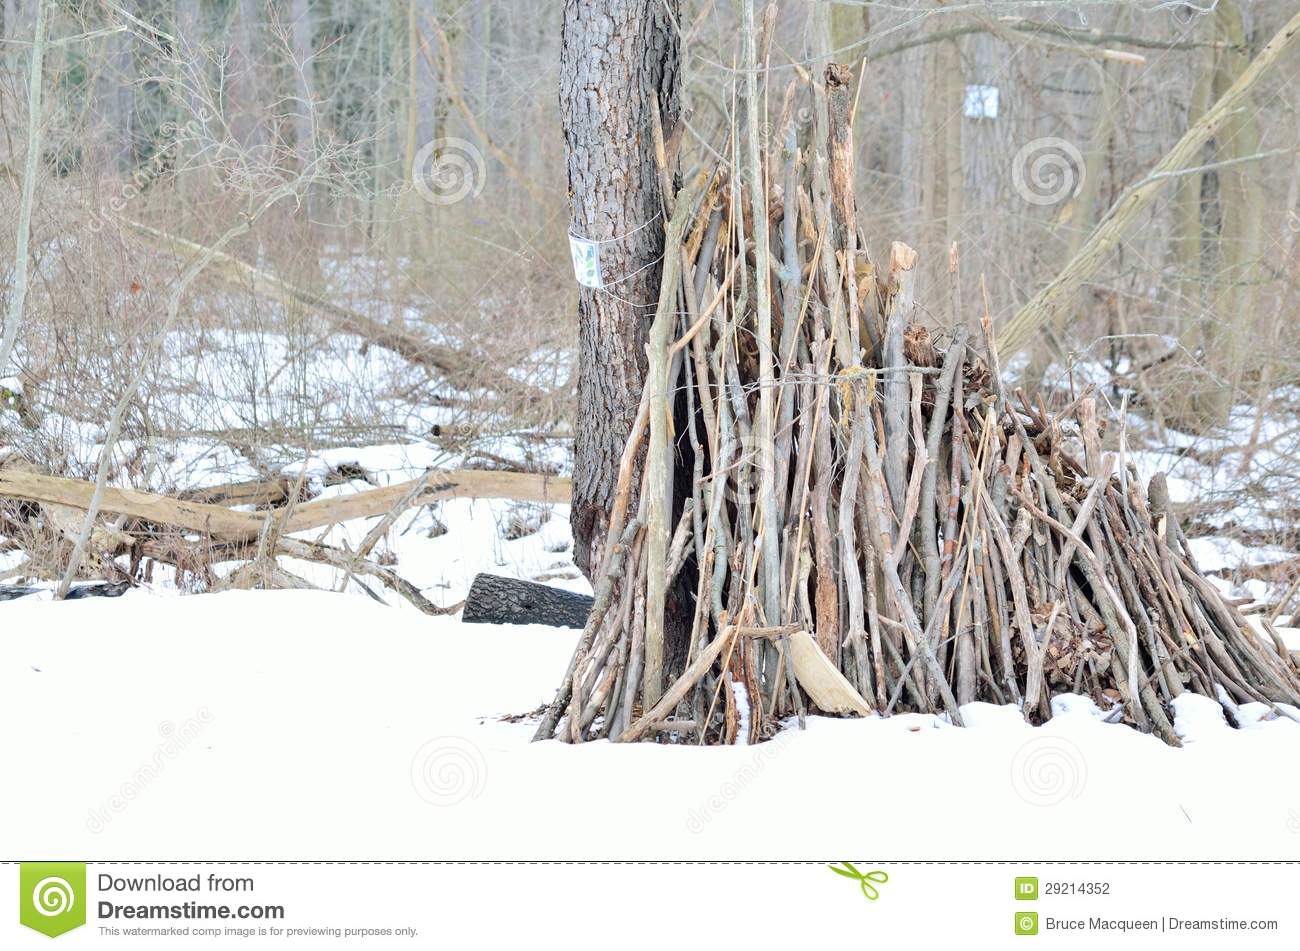 Lean To Shelter In The Woods During The Winter Season